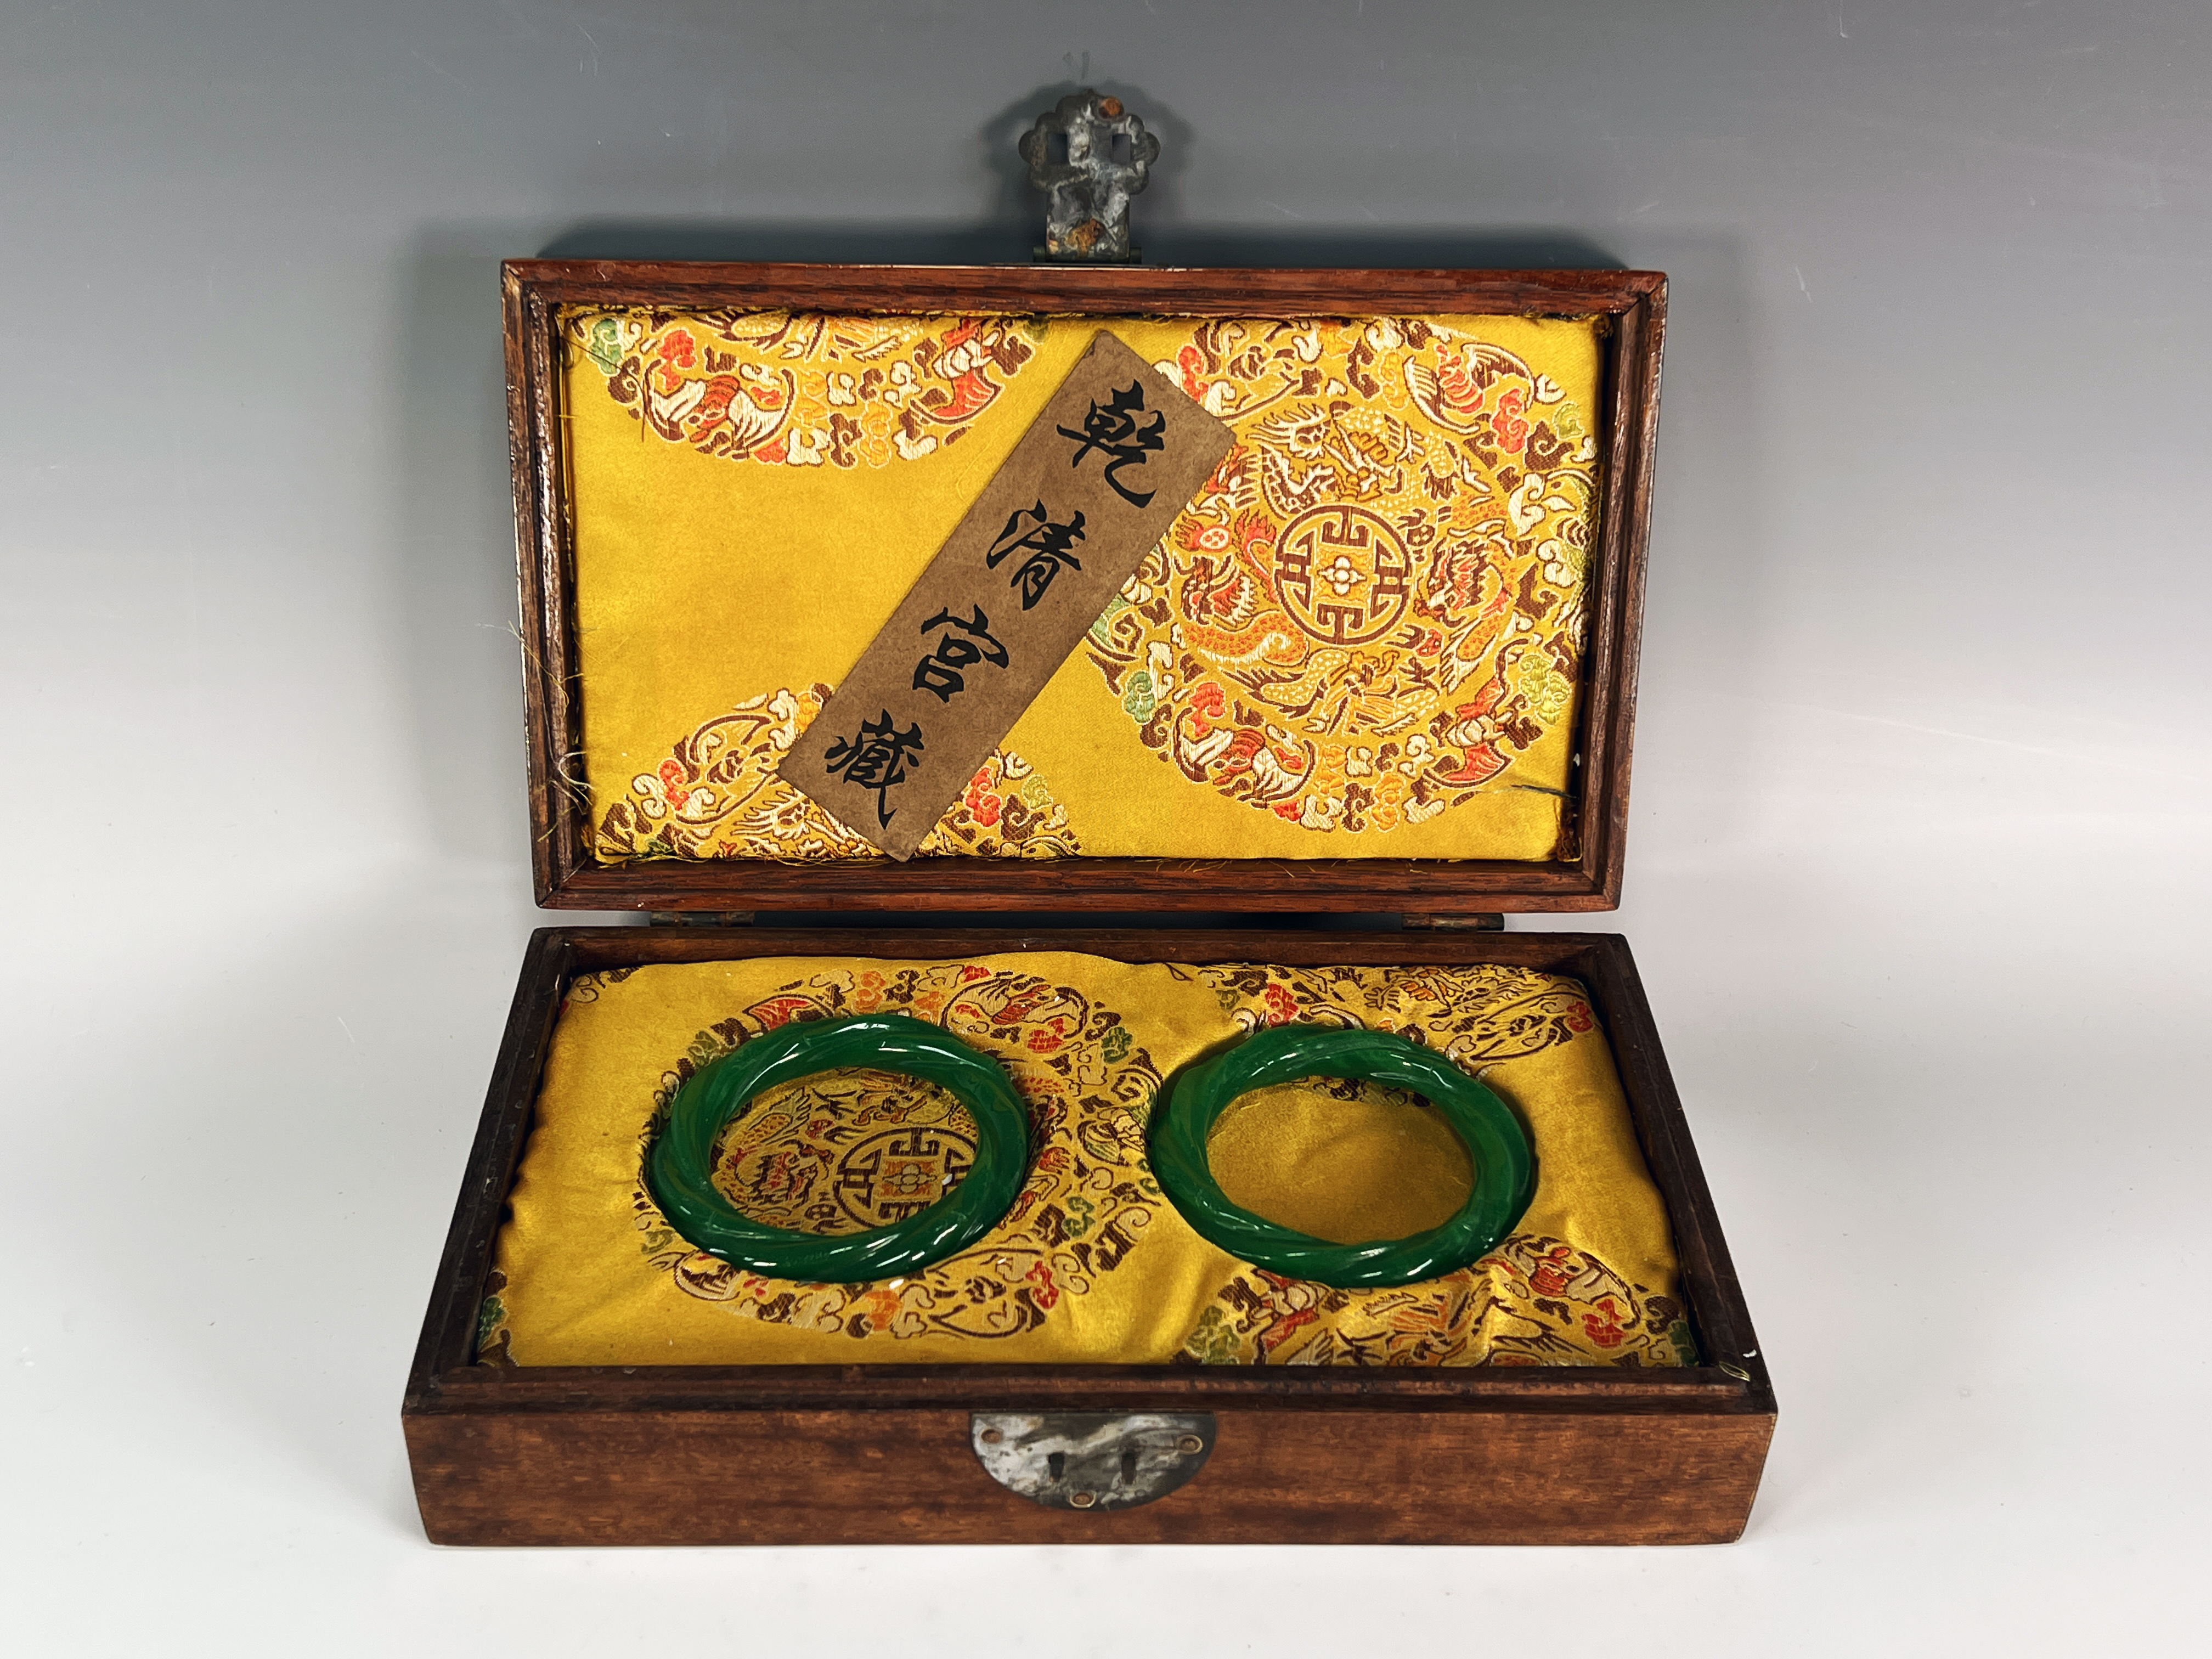 Exquisite Chinese Jade Bangles In Decorative Dragon Box image 1